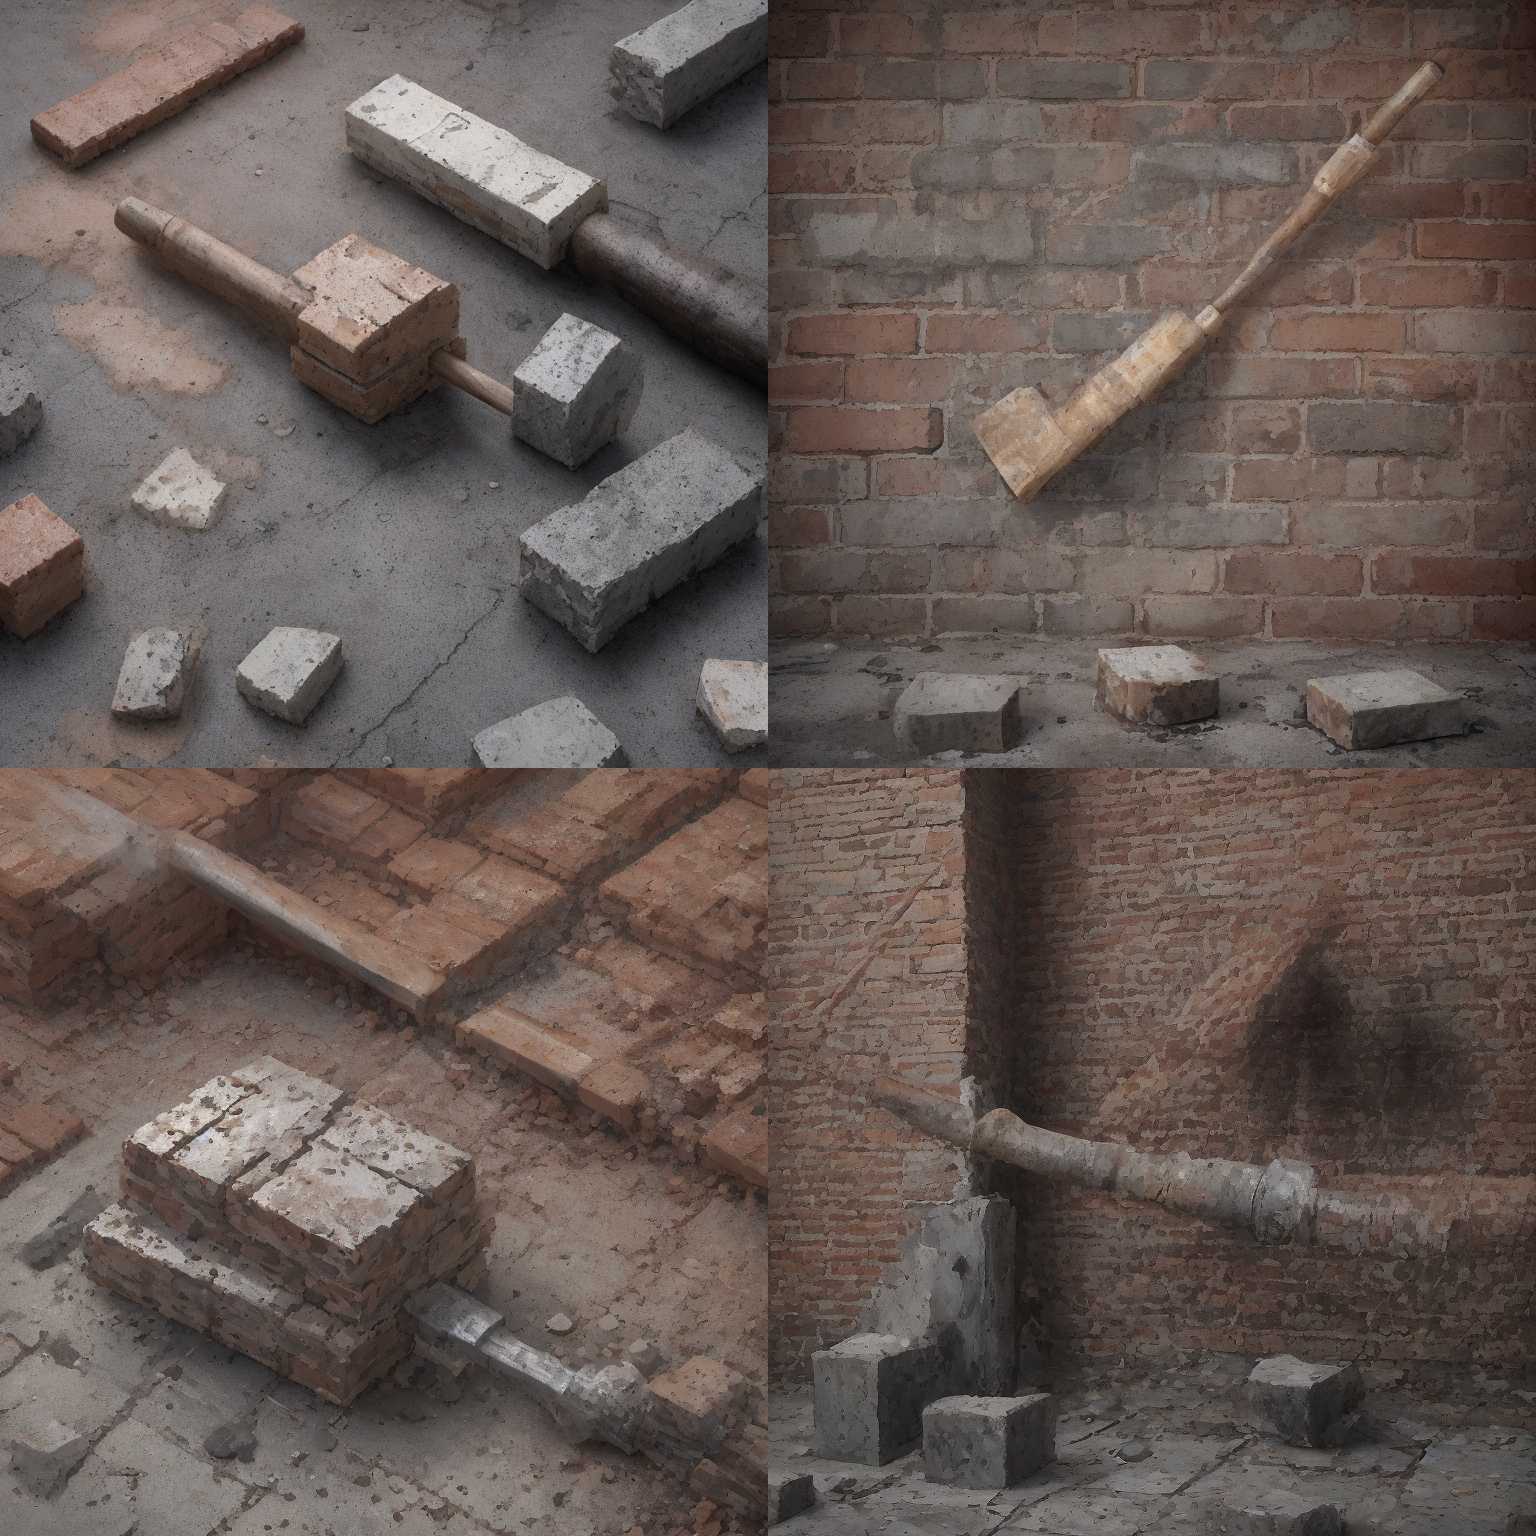 A brick hit with a sledgehammer